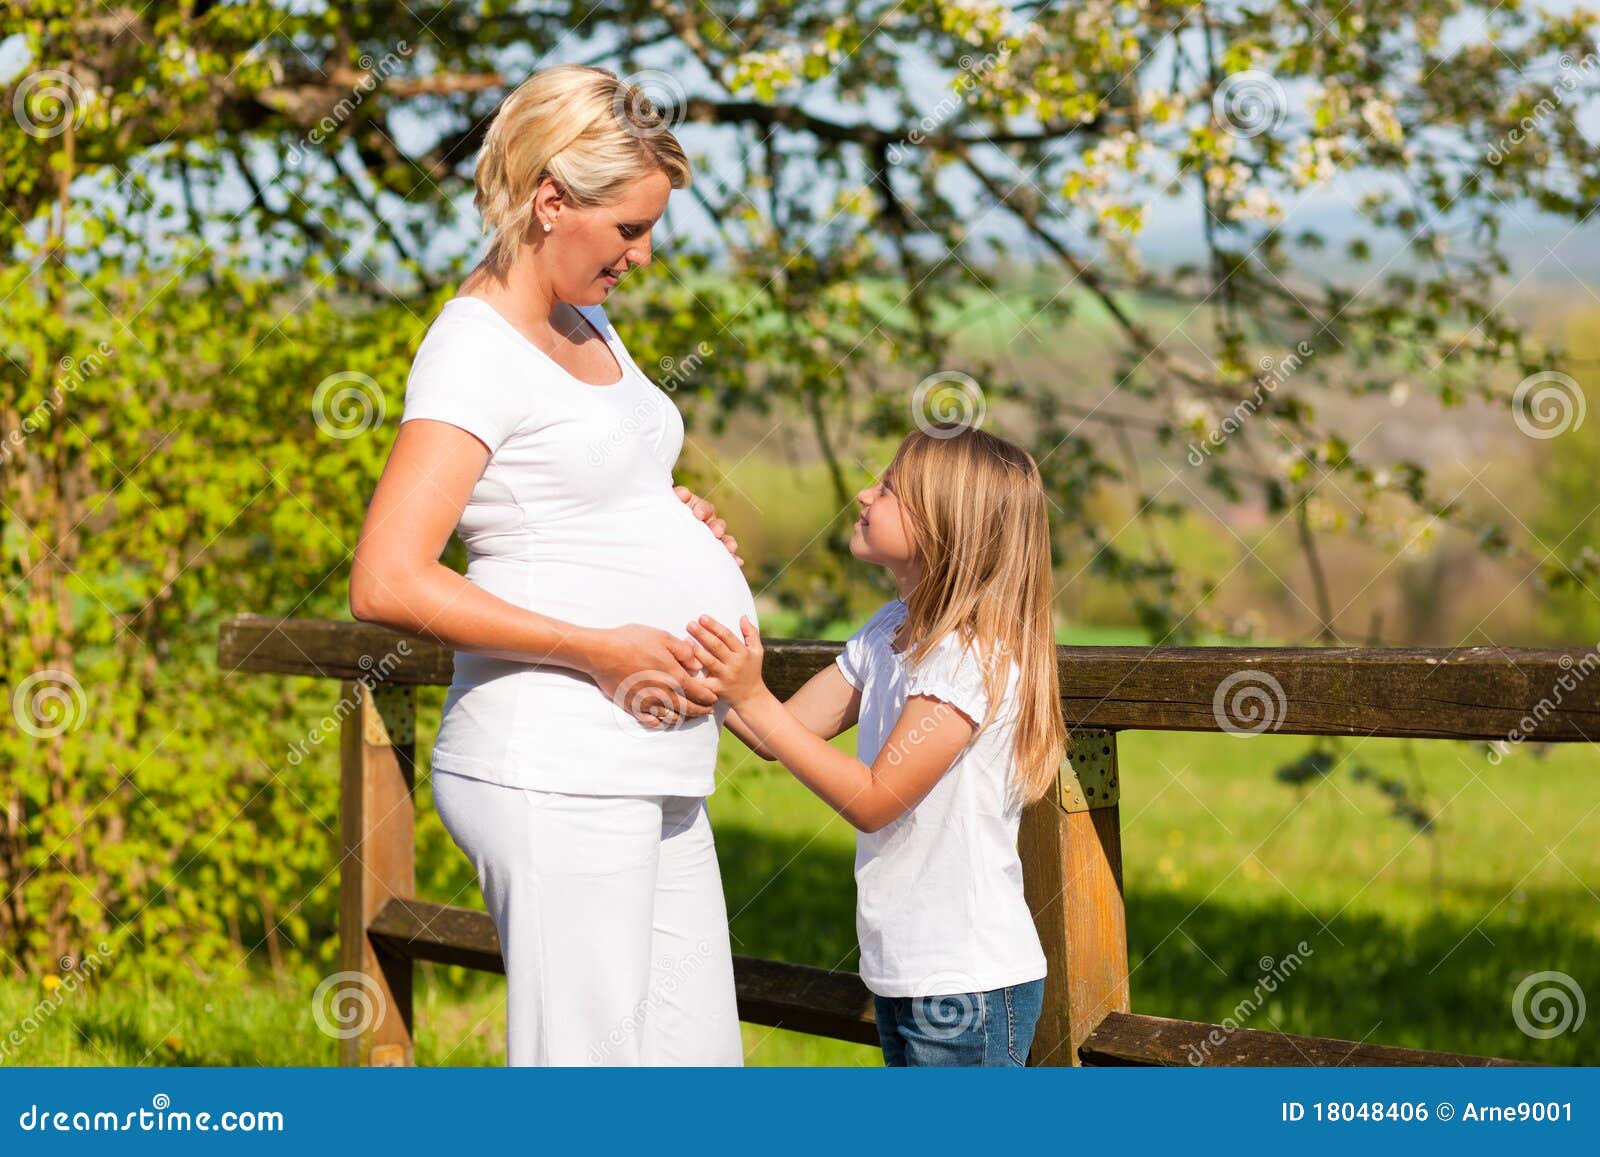 Pregnancy Girl Touching Belly Of Pregnant Mother Royalty Free Stock Image Image 18048406